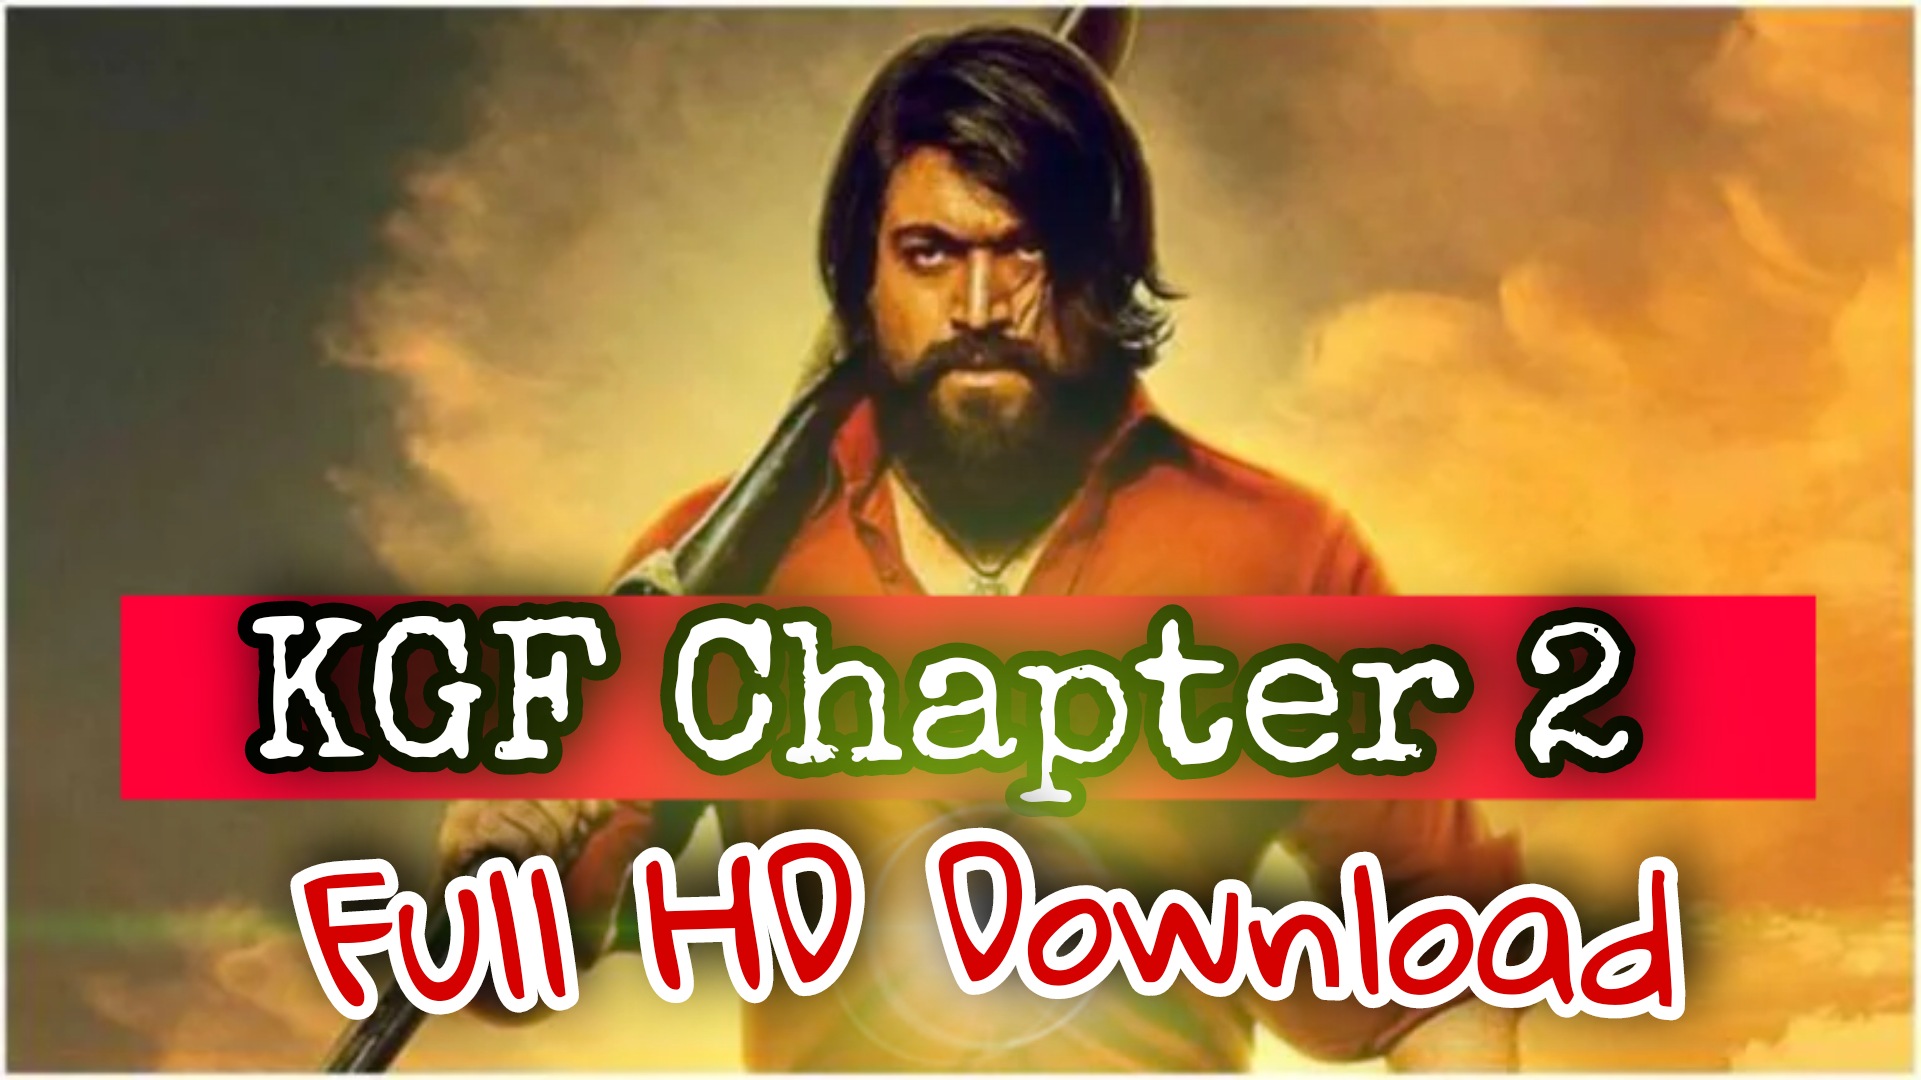 Where can I see KGF chapter 2? |  How To Watch Kgf Chapter 2 movie